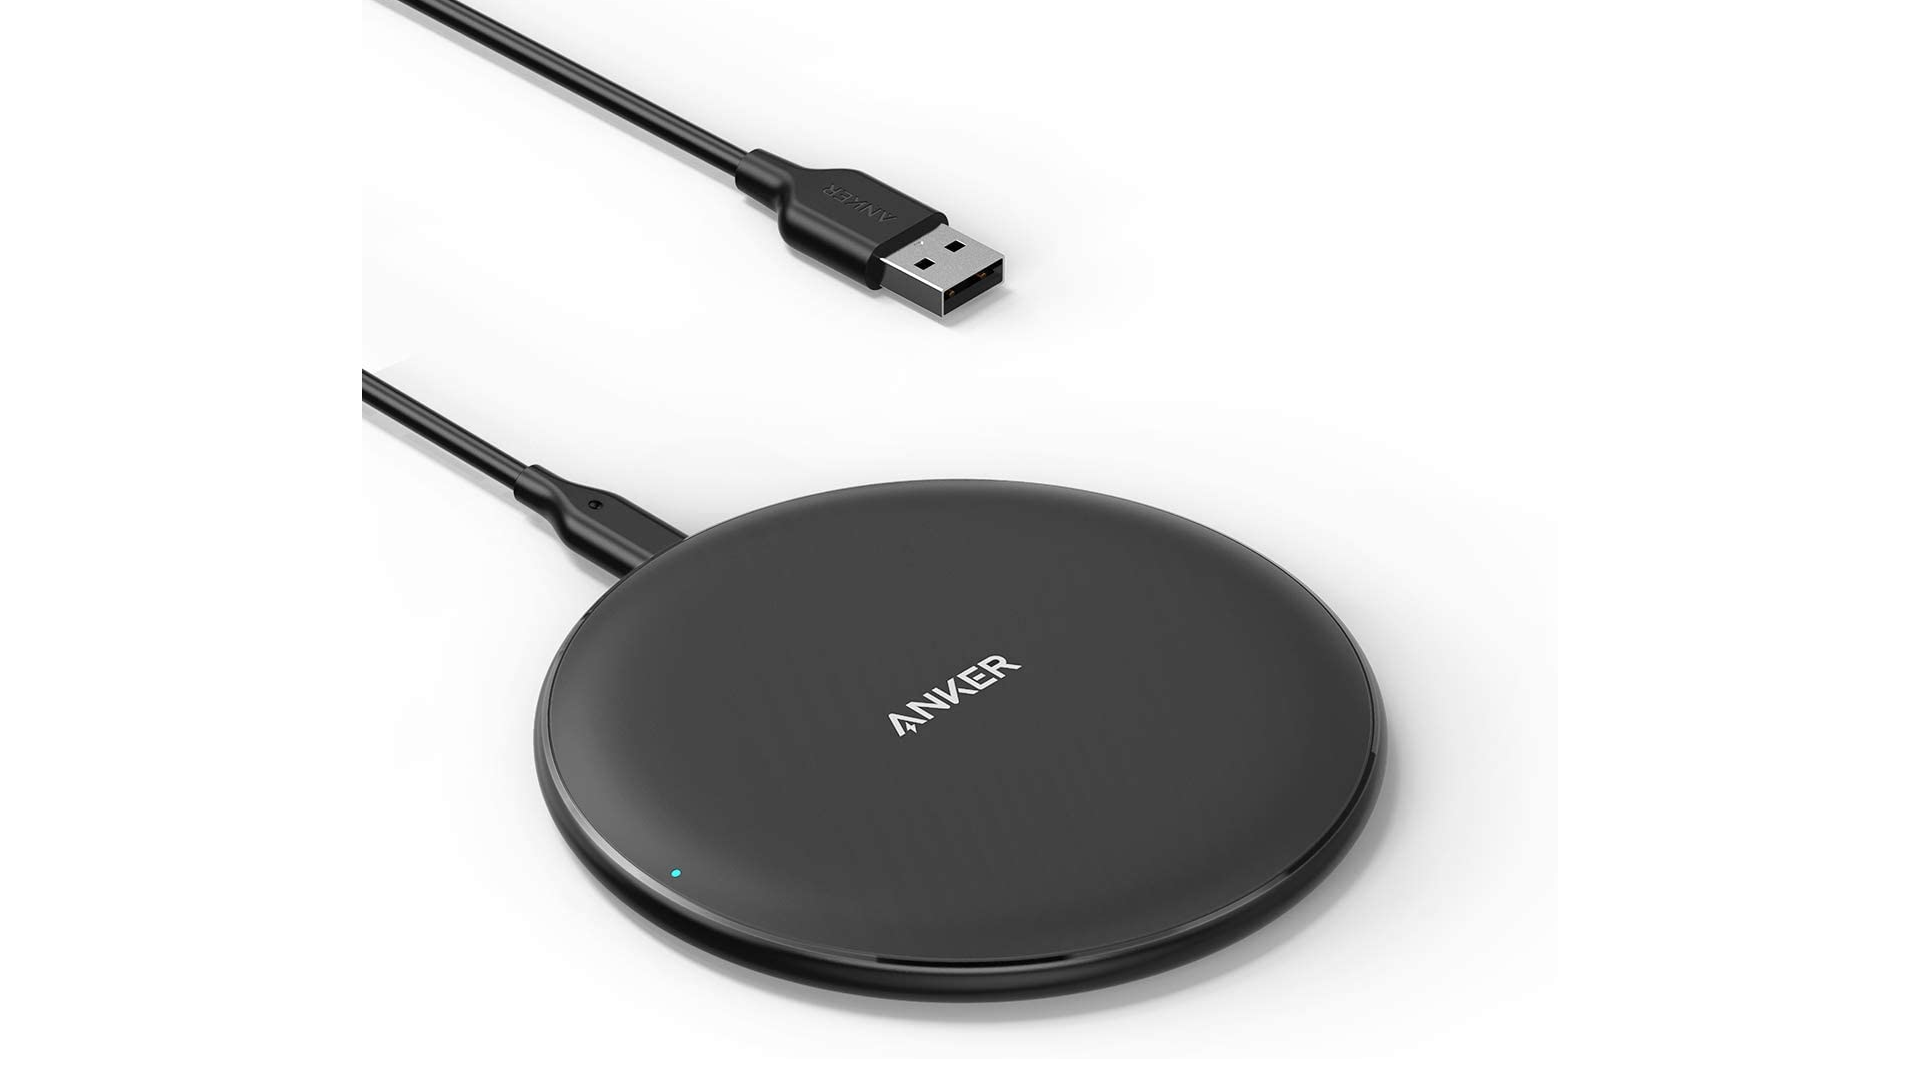 The Anker PowerWave Pad